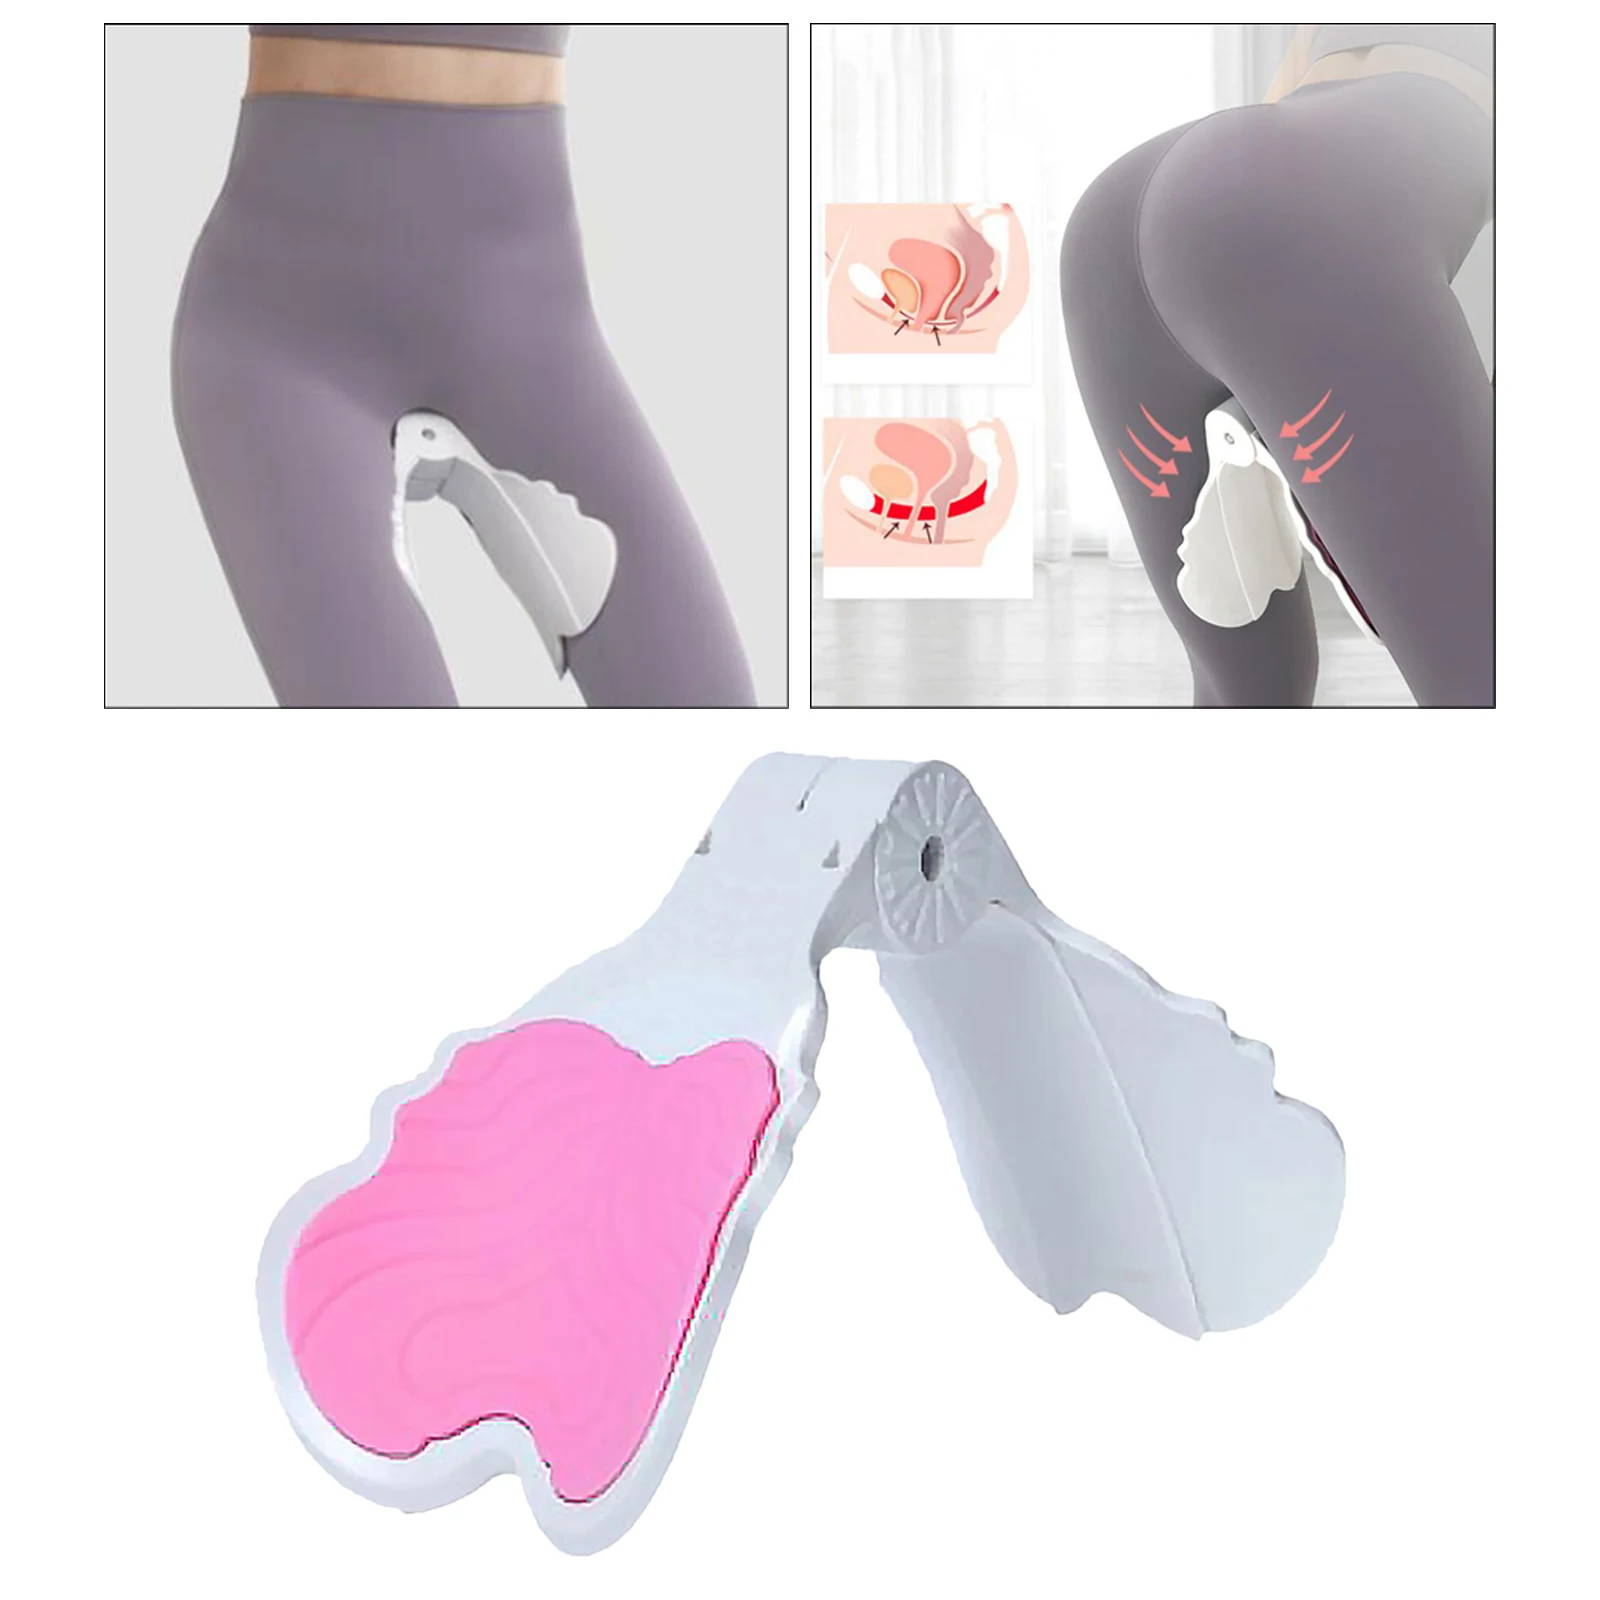 Thigh Master for Inner Thighs Thigh Workout Equipment for Home Gym Yoga Sport Weight Loss Fitness Tool